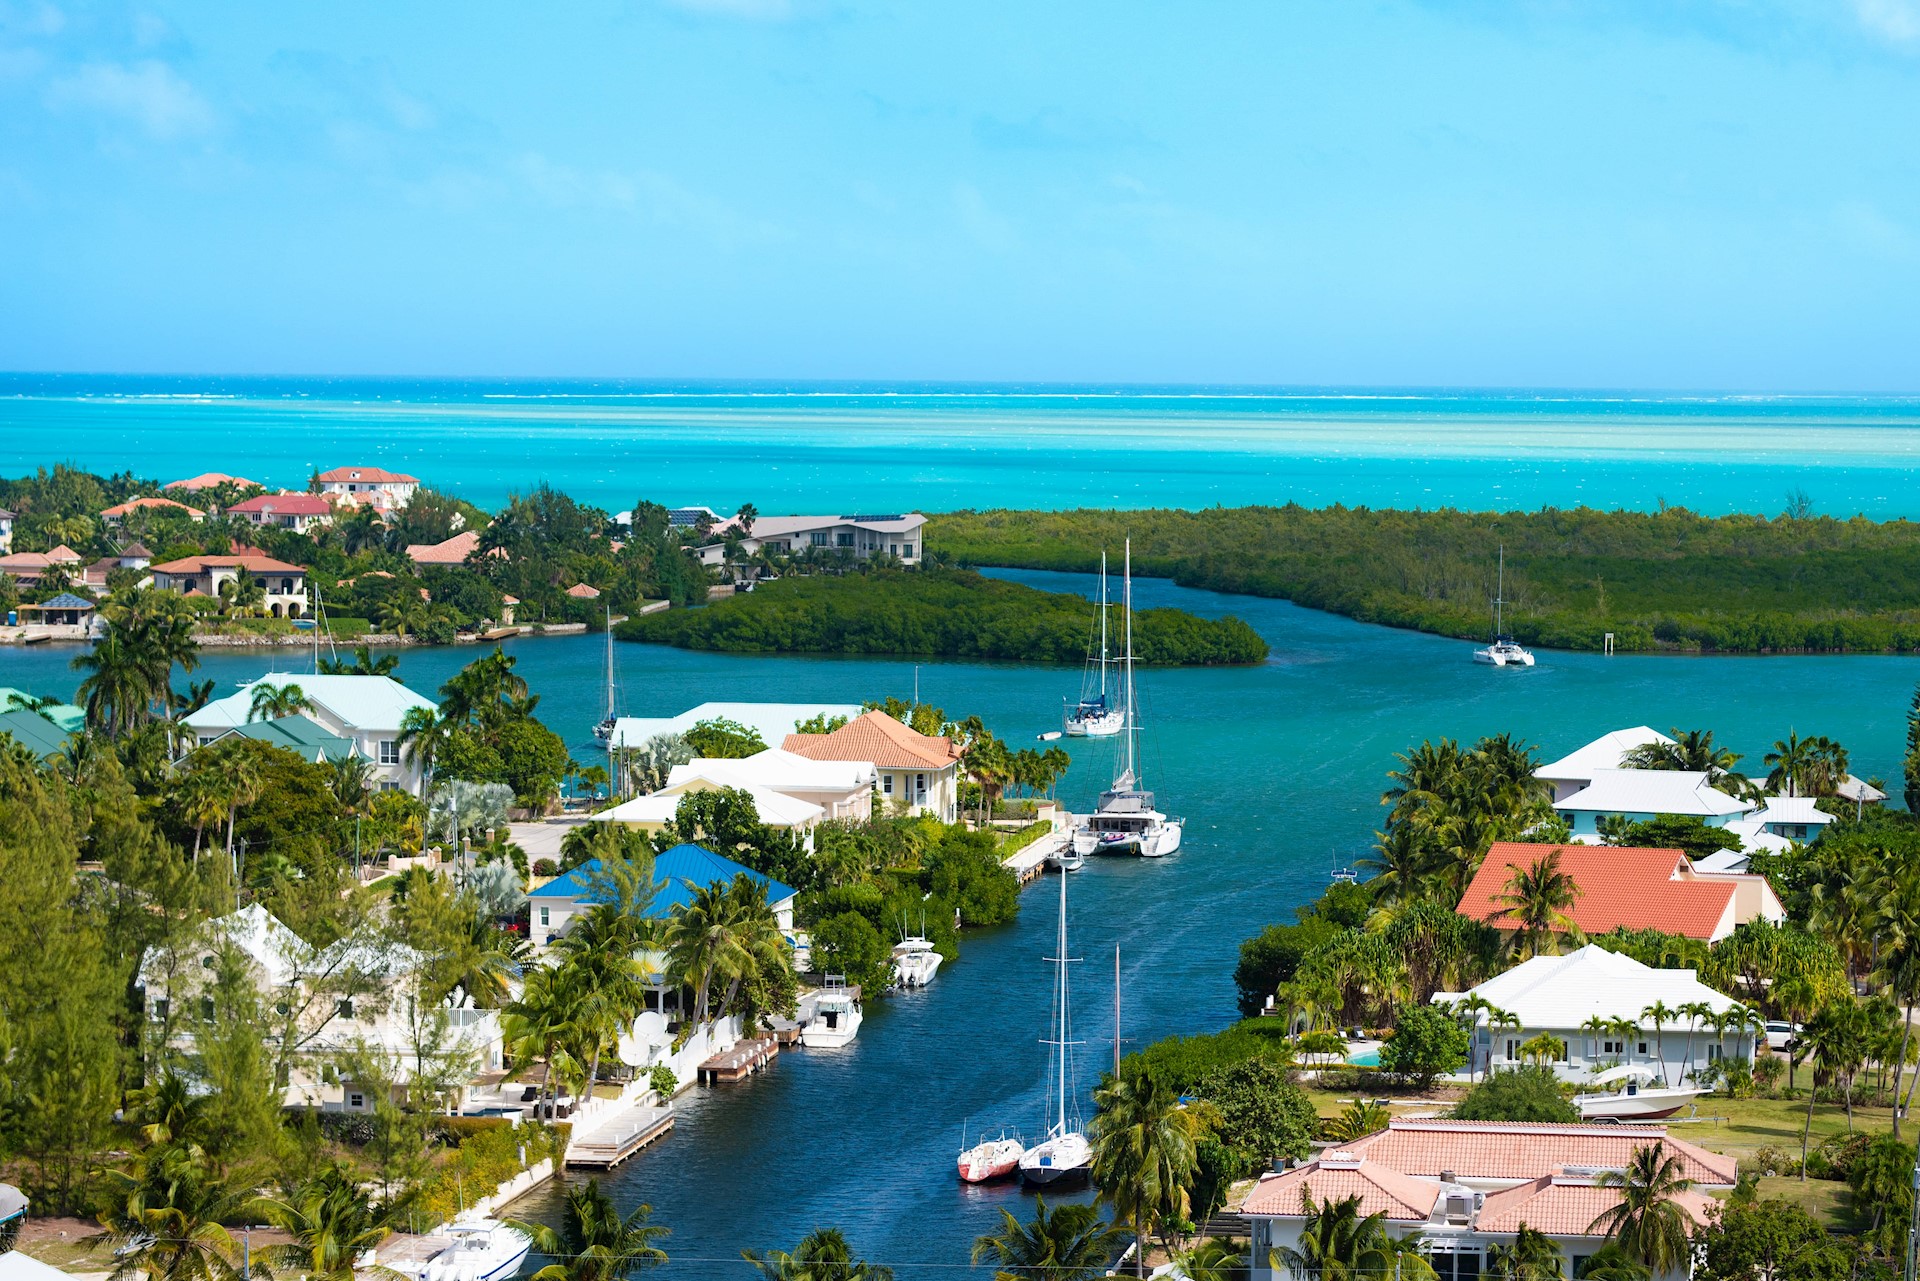 Buying property in the Cayman Islands